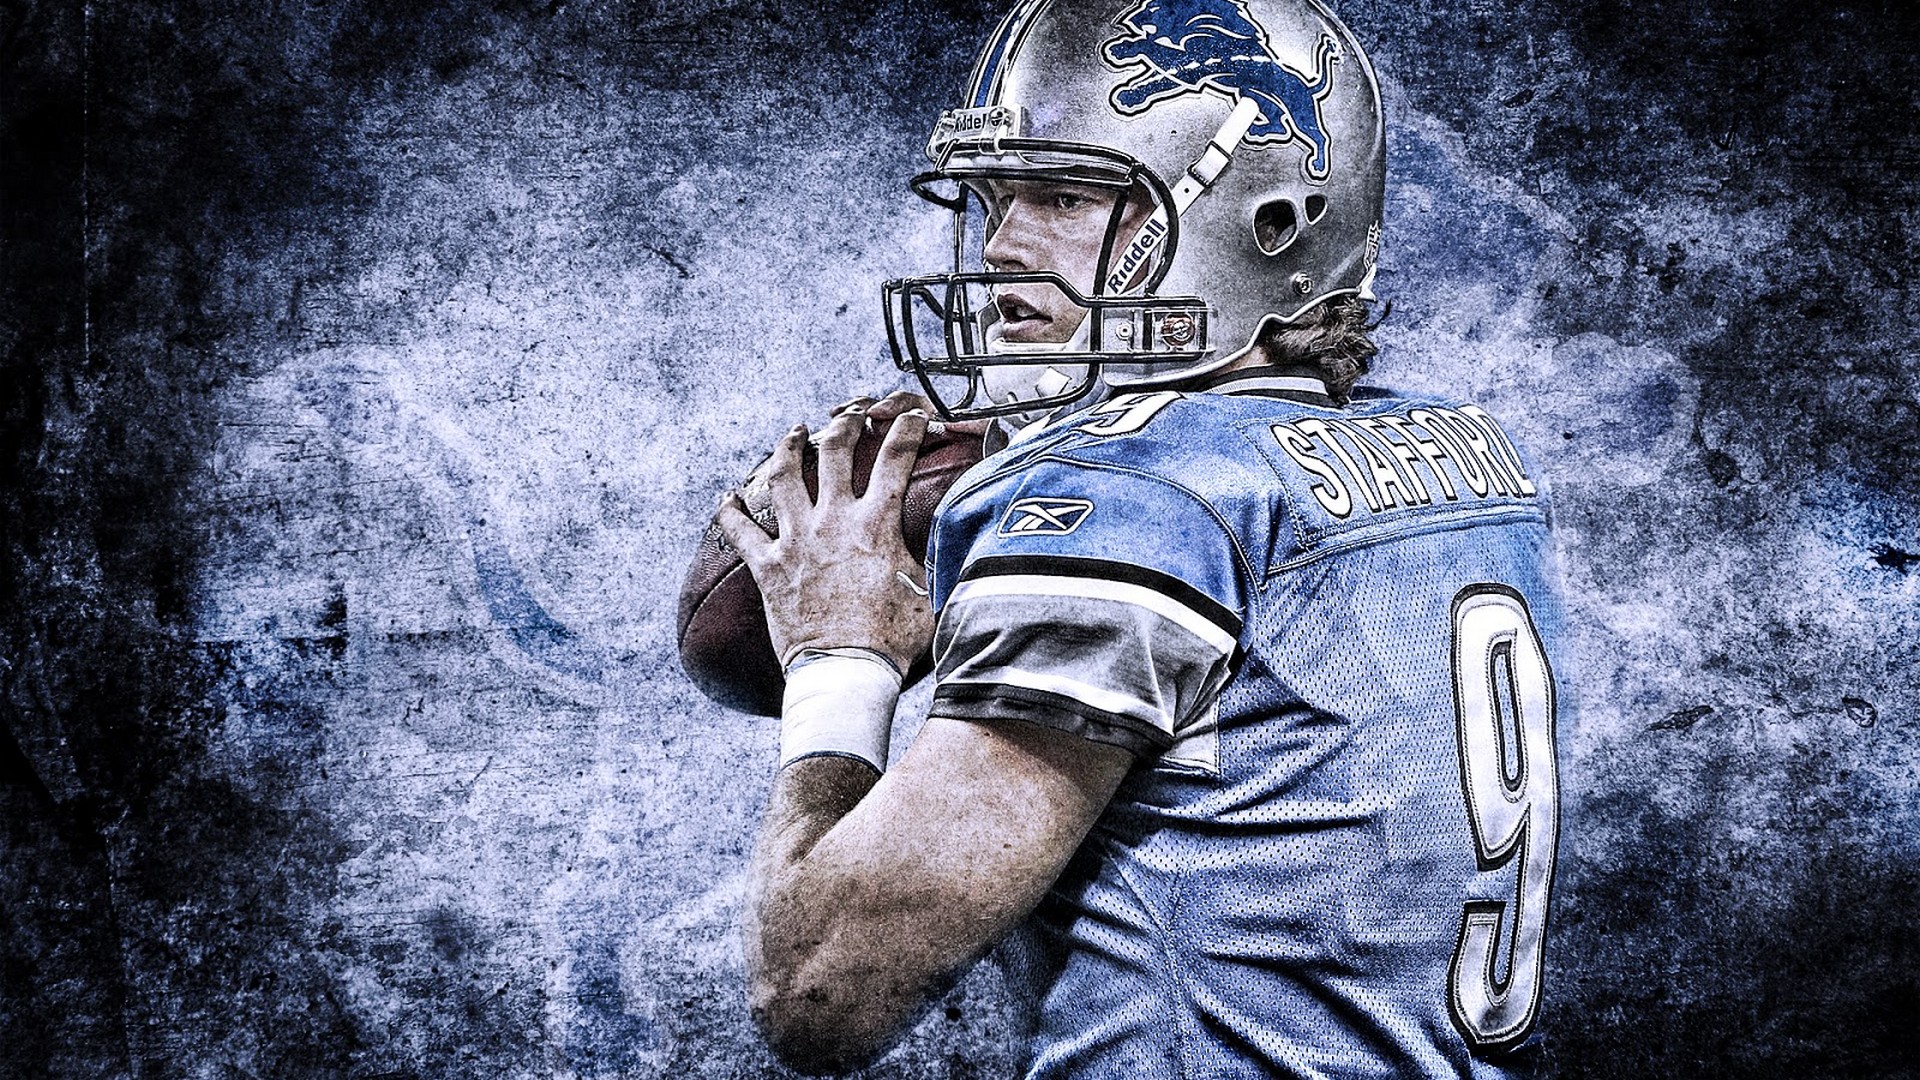 PC Wallpaper Detroit Lions with high-resolution 1920x1080 pixel. Download and set as wallpaper for Desktop Computer, Apple iPhone X, XS Max, XR, 8, 7, 6, SE, iPad, Android